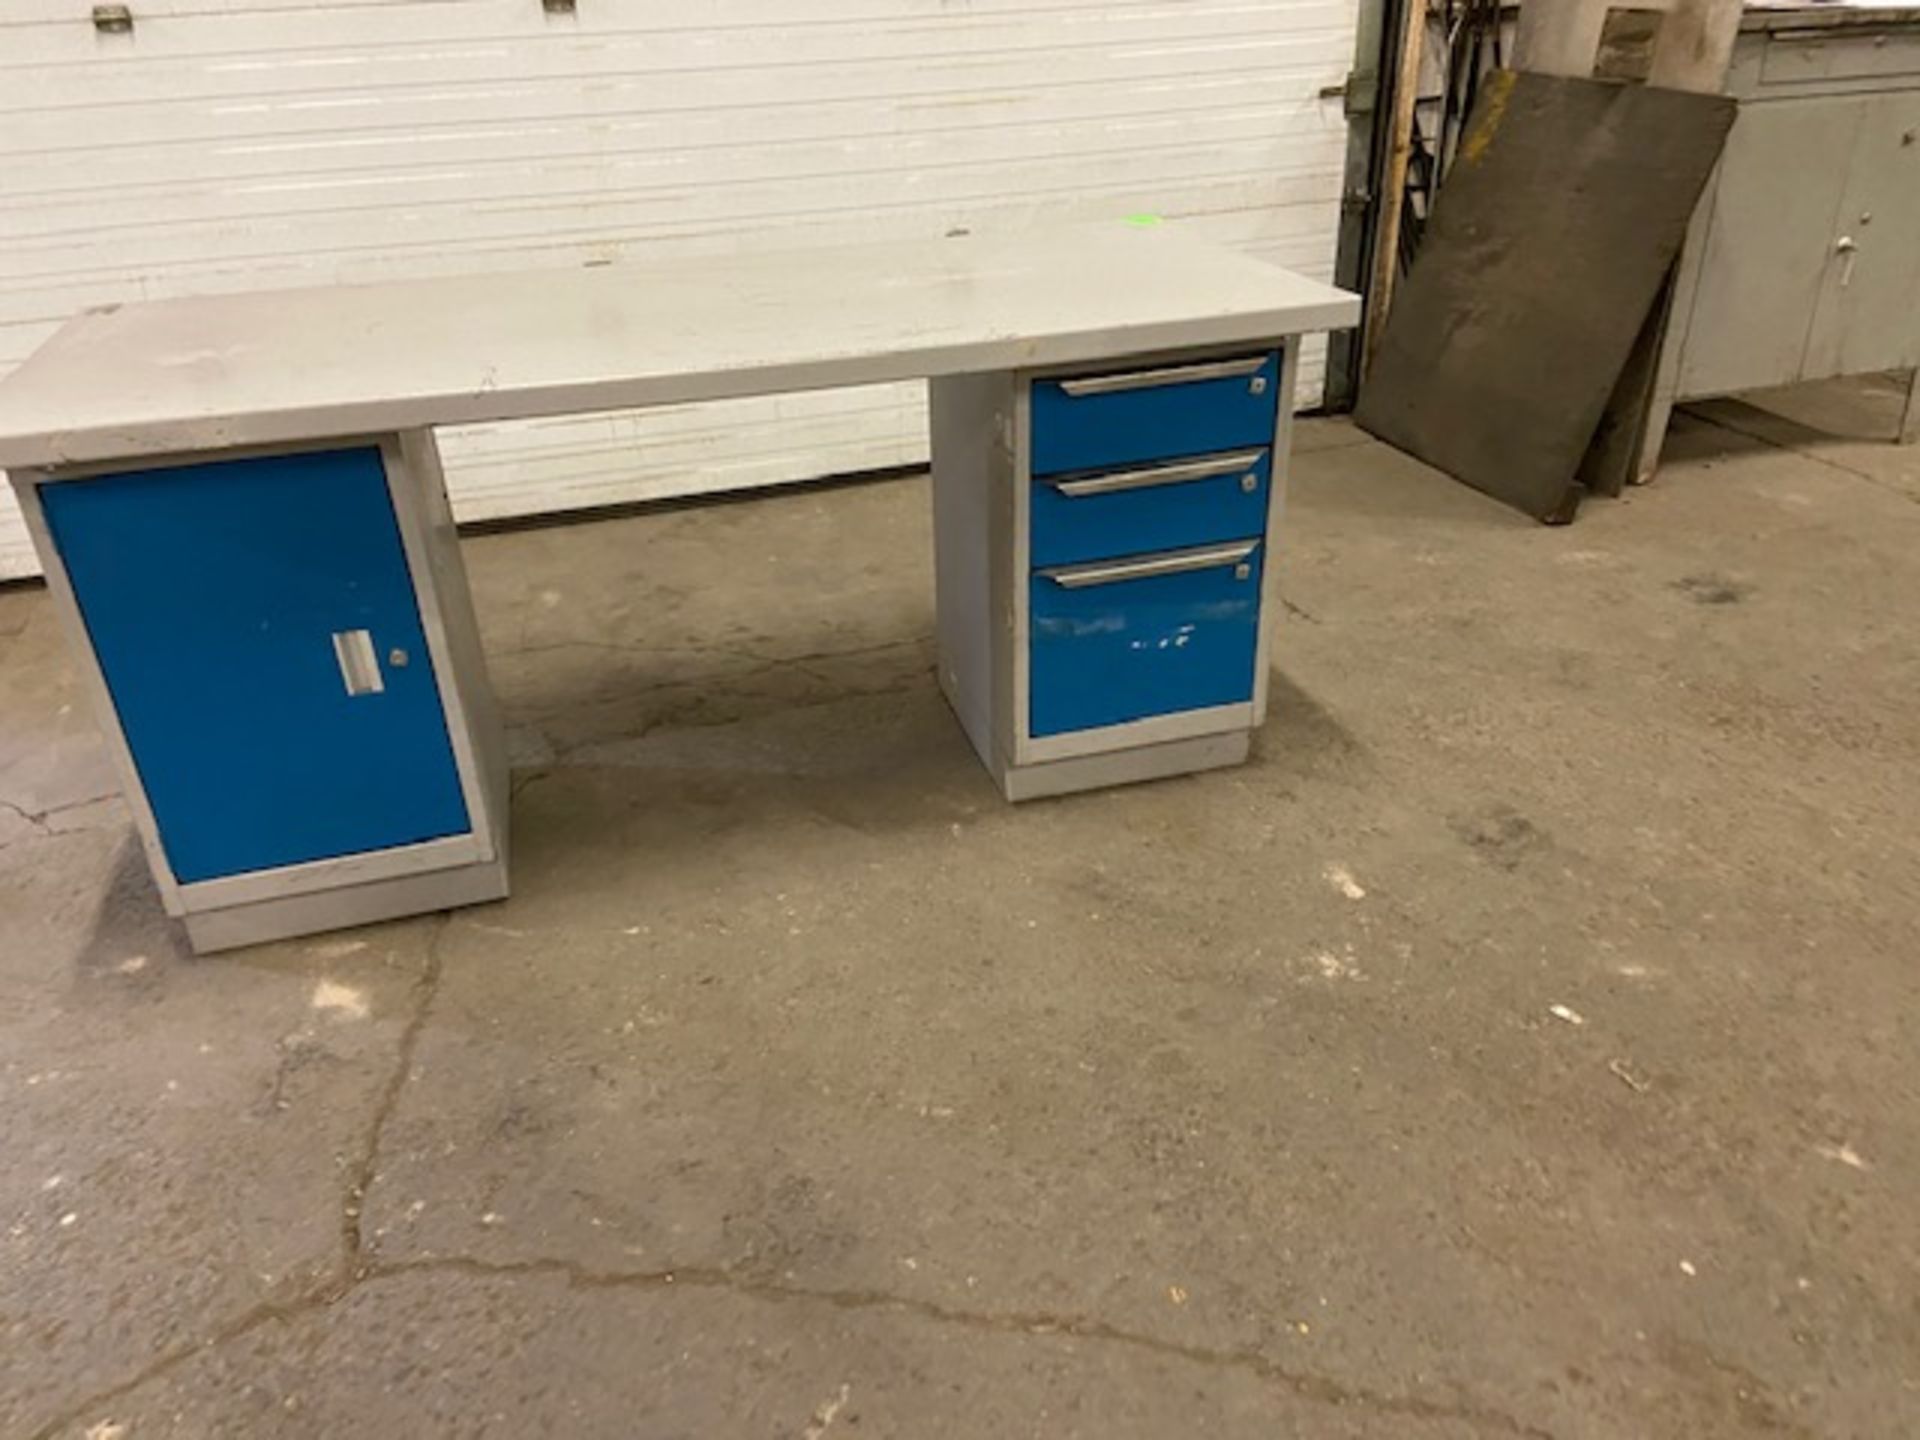 Work Table Work Bench Unit 72" x 30" with Drawers on both sides